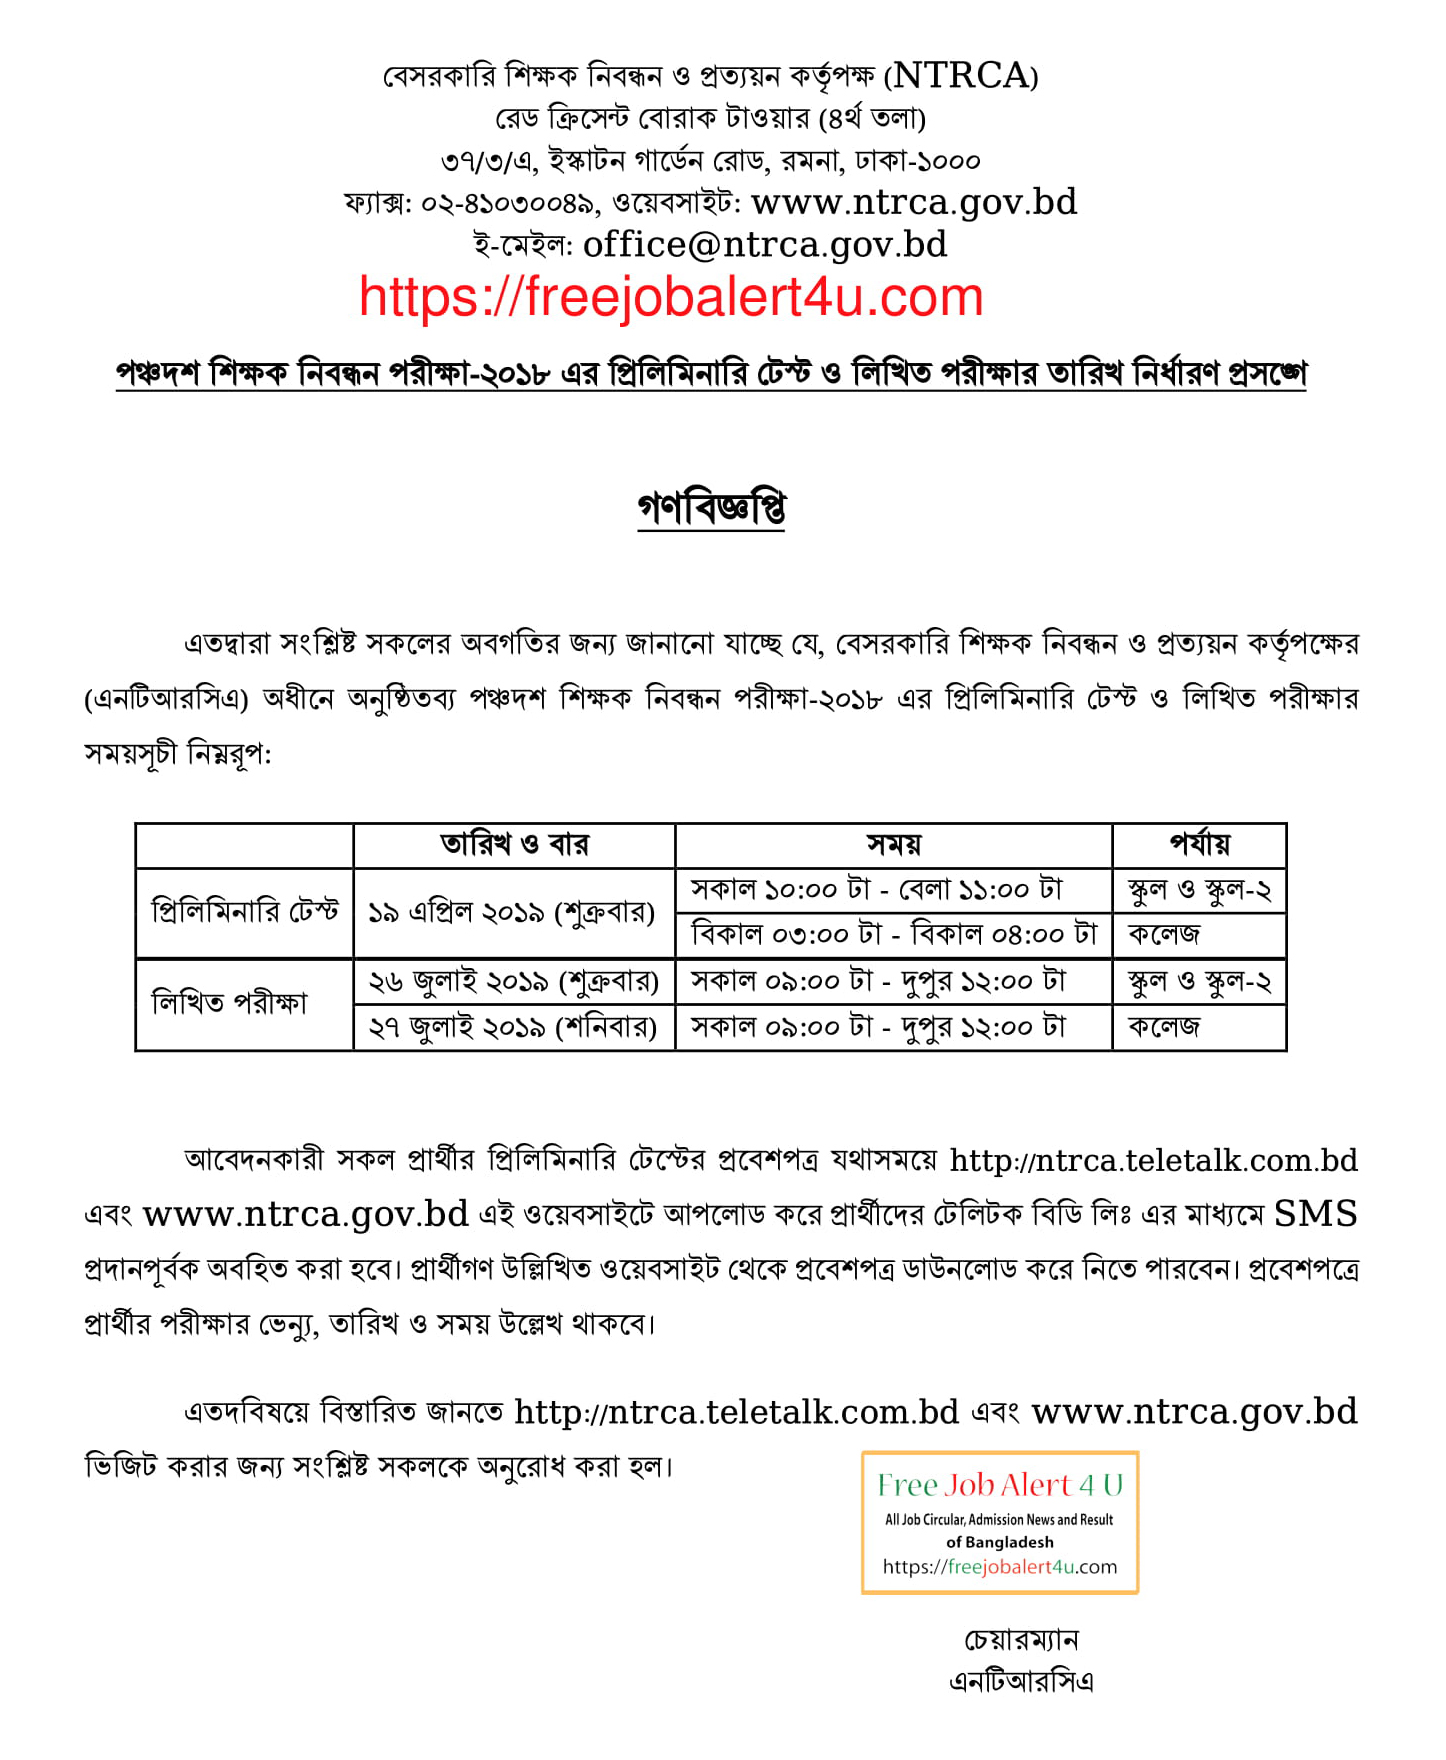 15th Non-Government Teachers’ Registration & Certification Authority (NTRCA) exam date 2019